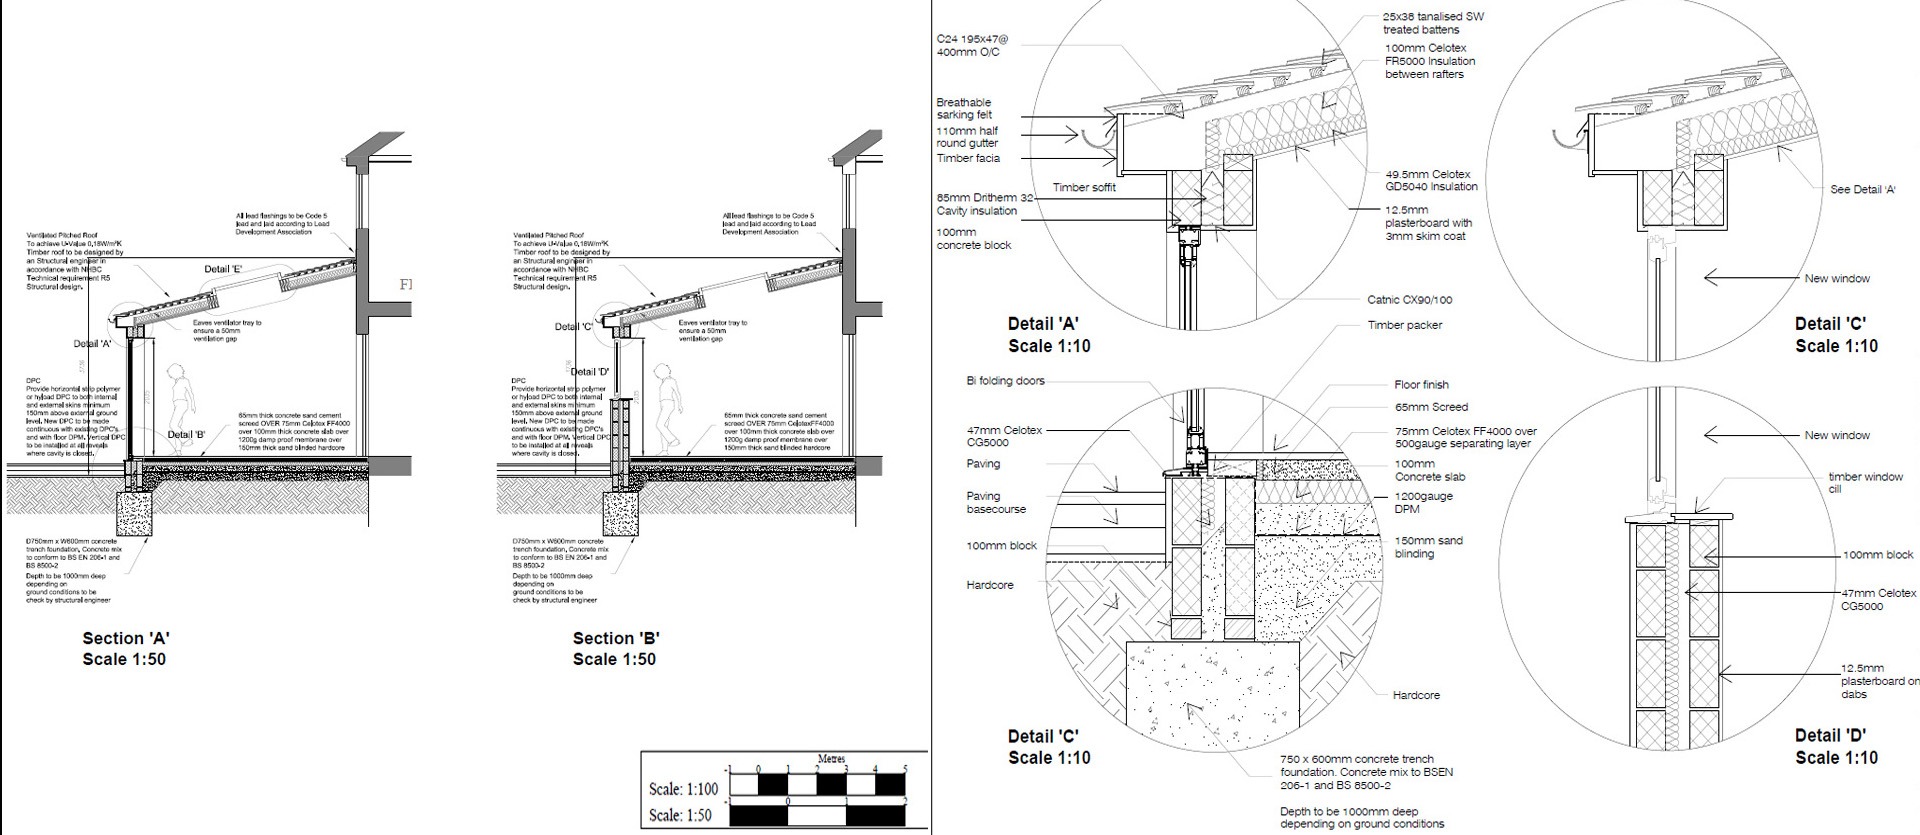 Building Regulation Drawings London, Extension ArchitectureExtension